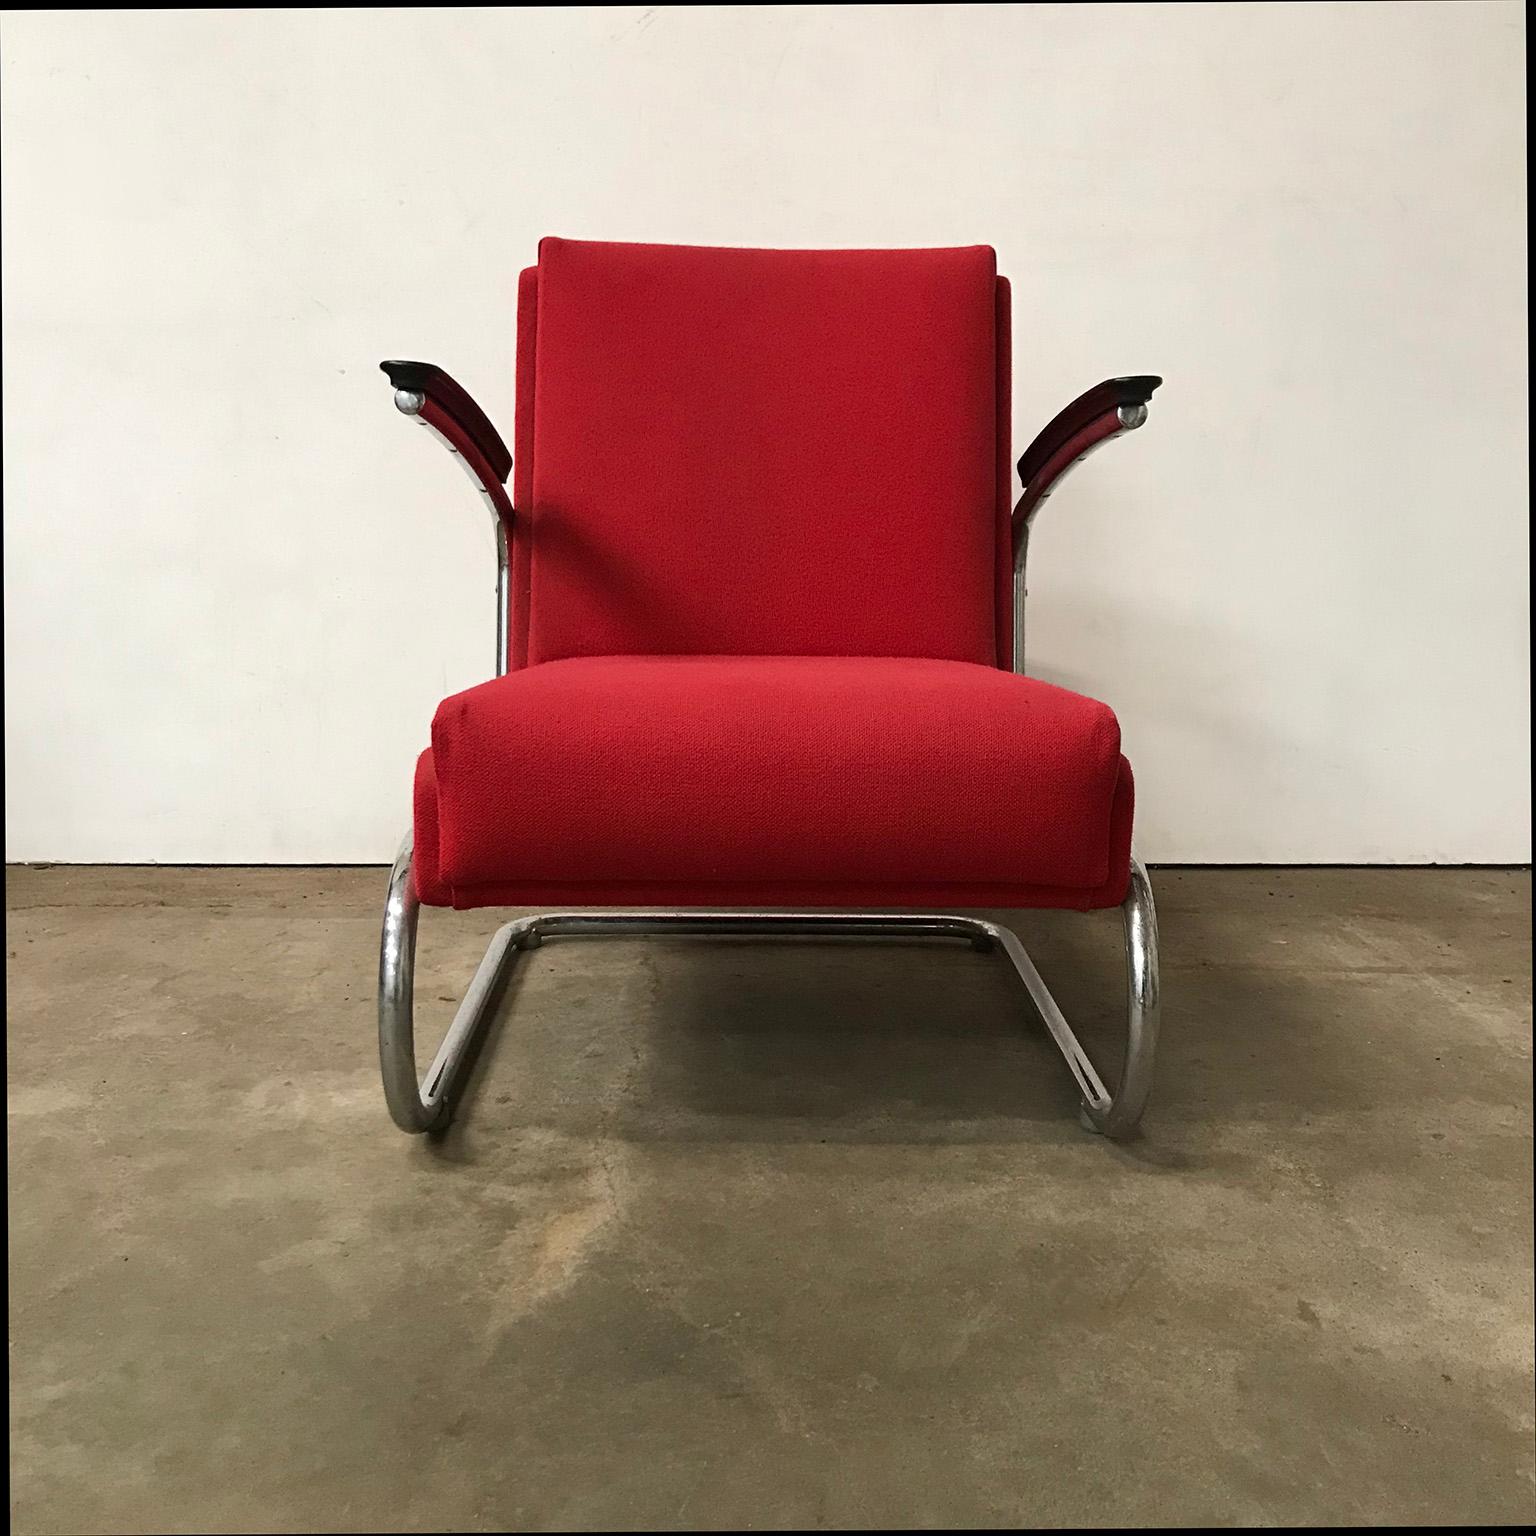 Metal Dutch Tubular Easy Chair in Burgundy Red and Black Armrests, circa 1930